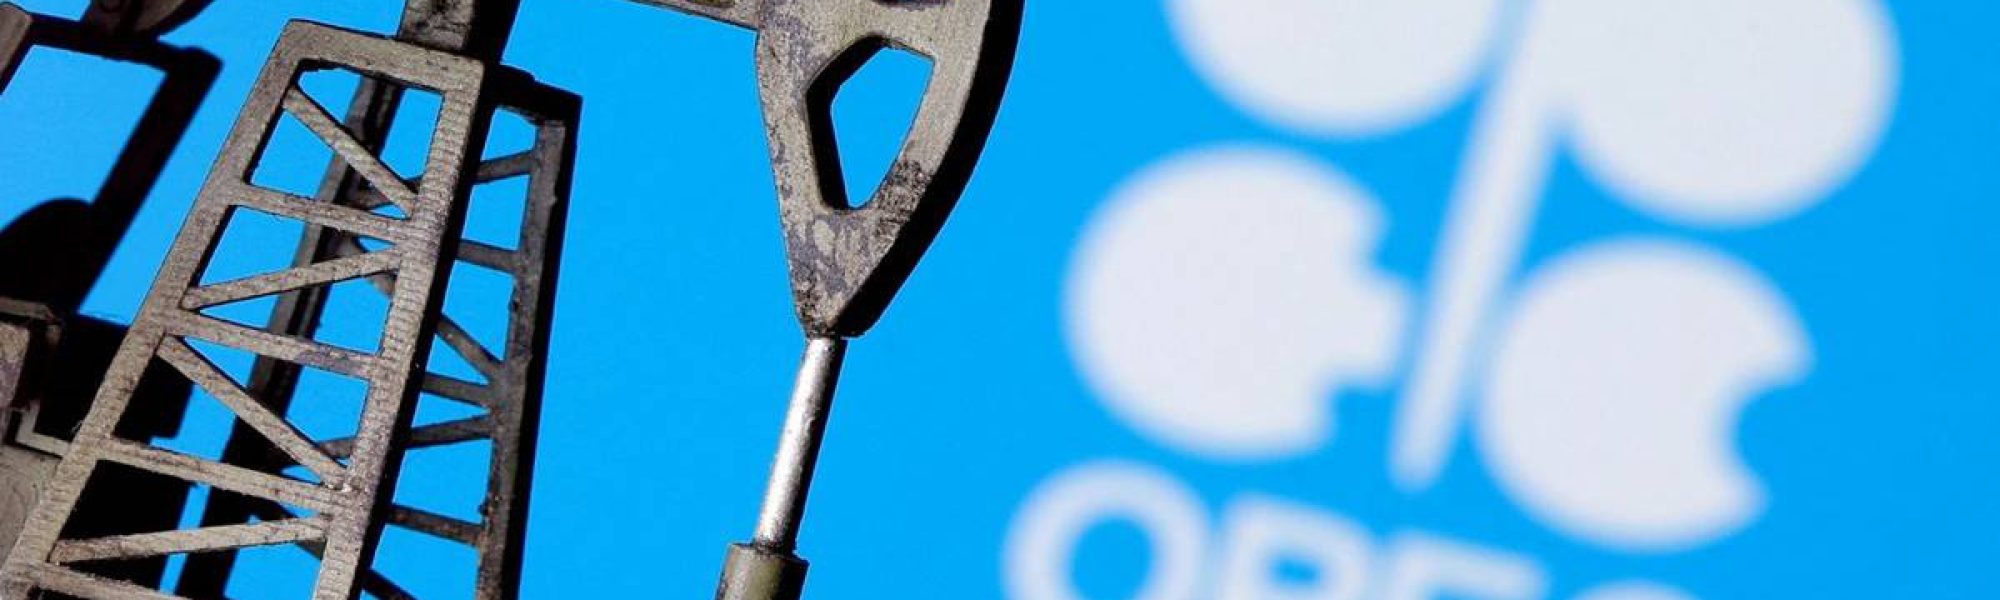 OPEC+ cuts ahead of winter fan global inflation concerns